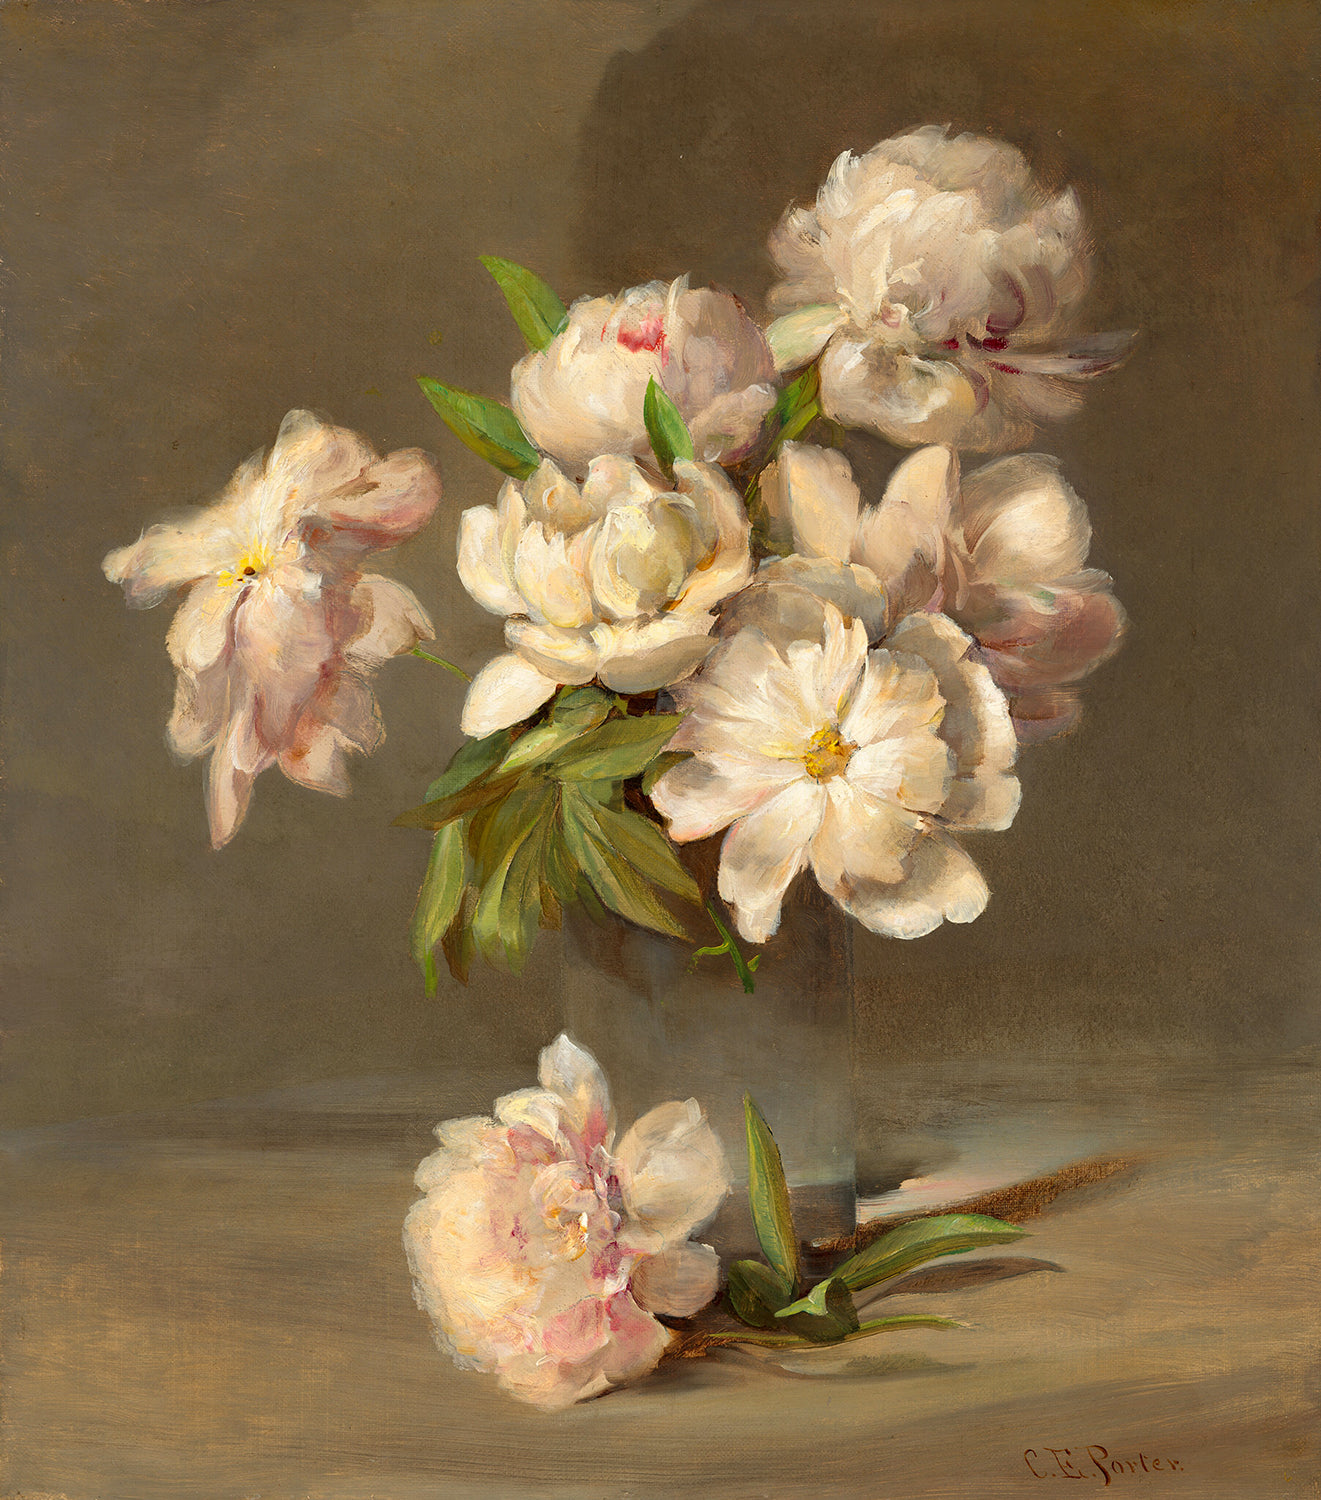 Peonies in a Vase by Charles Ethan Porter Art Print